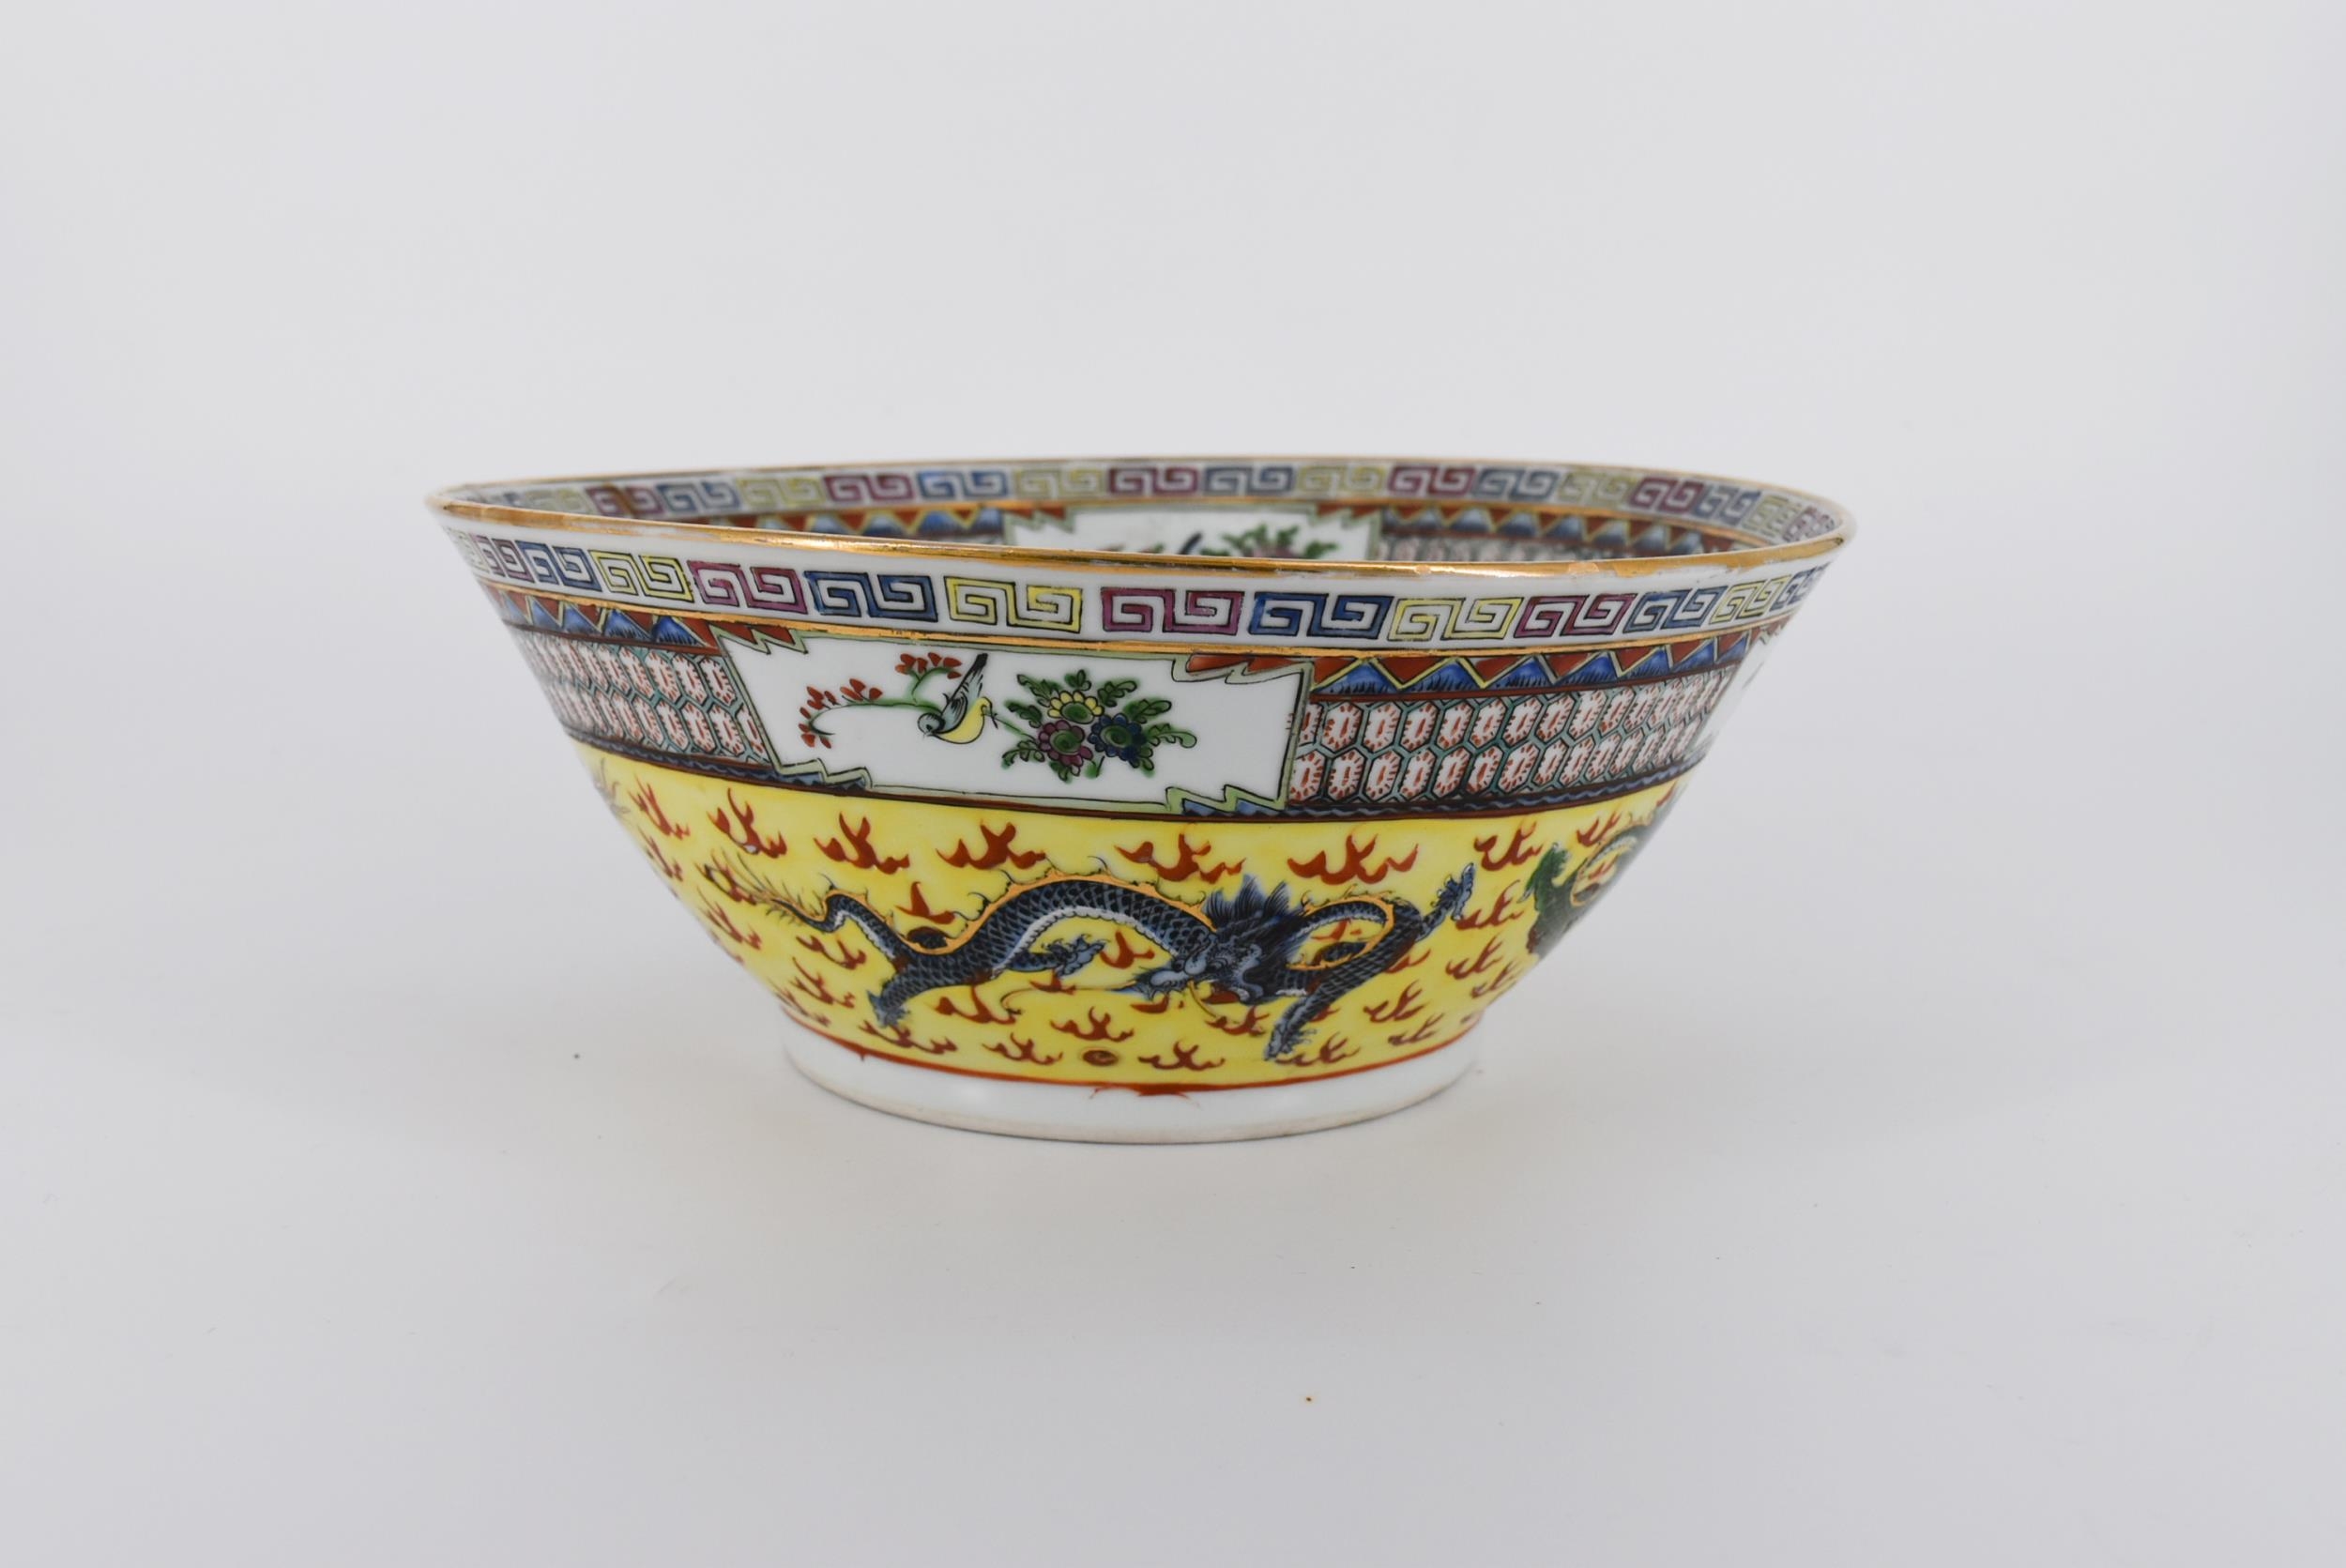 A 20th century Chinese porcelain bowl with dragon decoration along with a rose design and gilded - Image 4 of 7